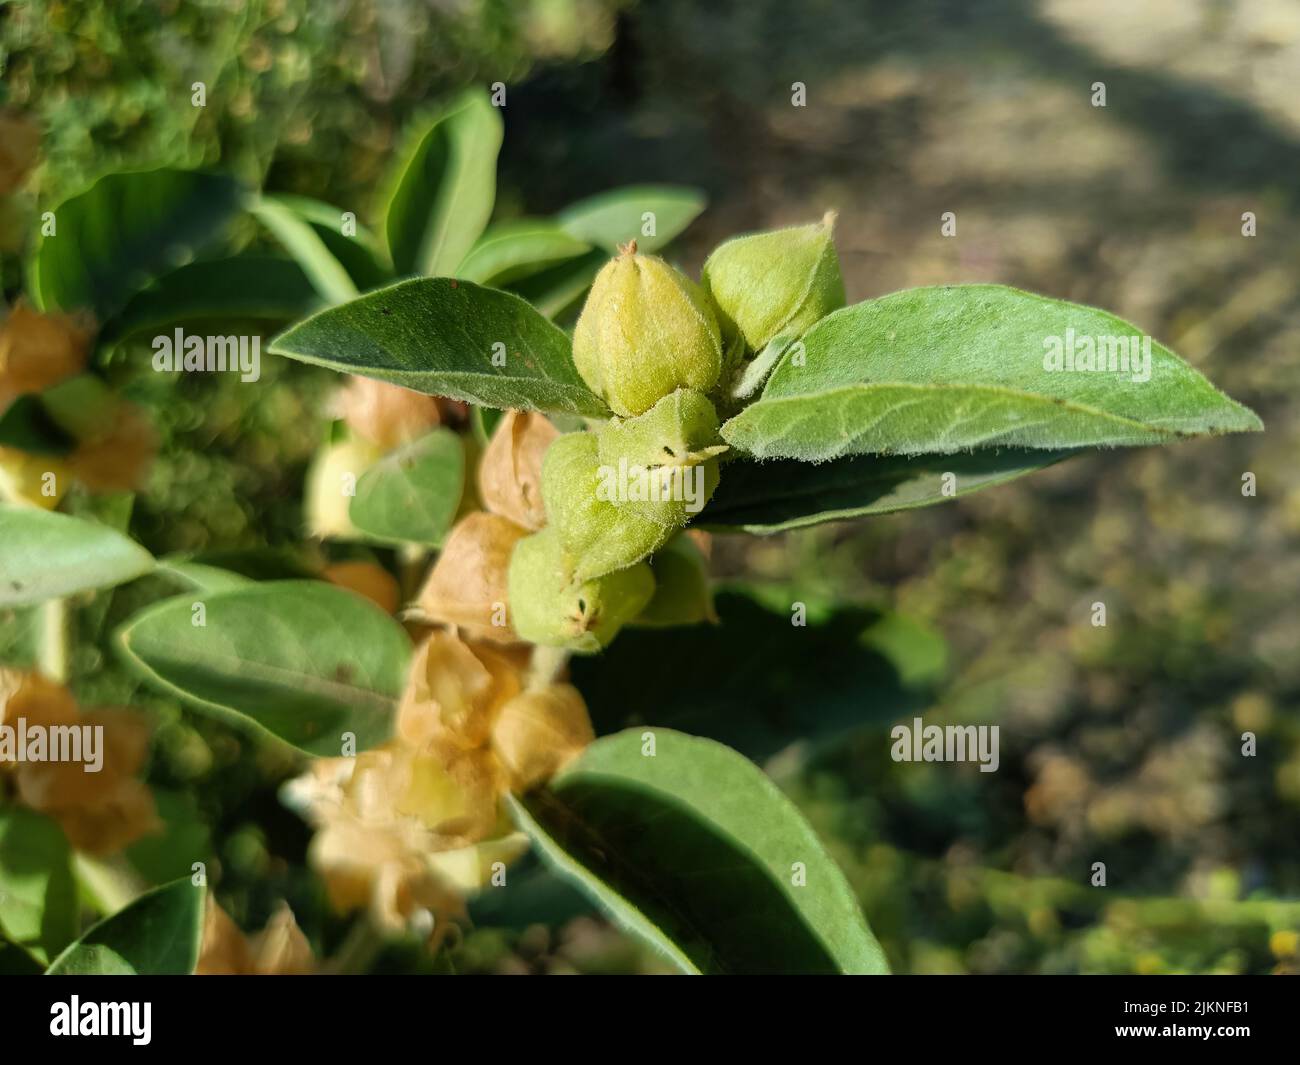 Ashwagandha plant or winter cherry plant or withania somnifera plant is used to ayurvedic medicinal plants plant in india Stock Photo